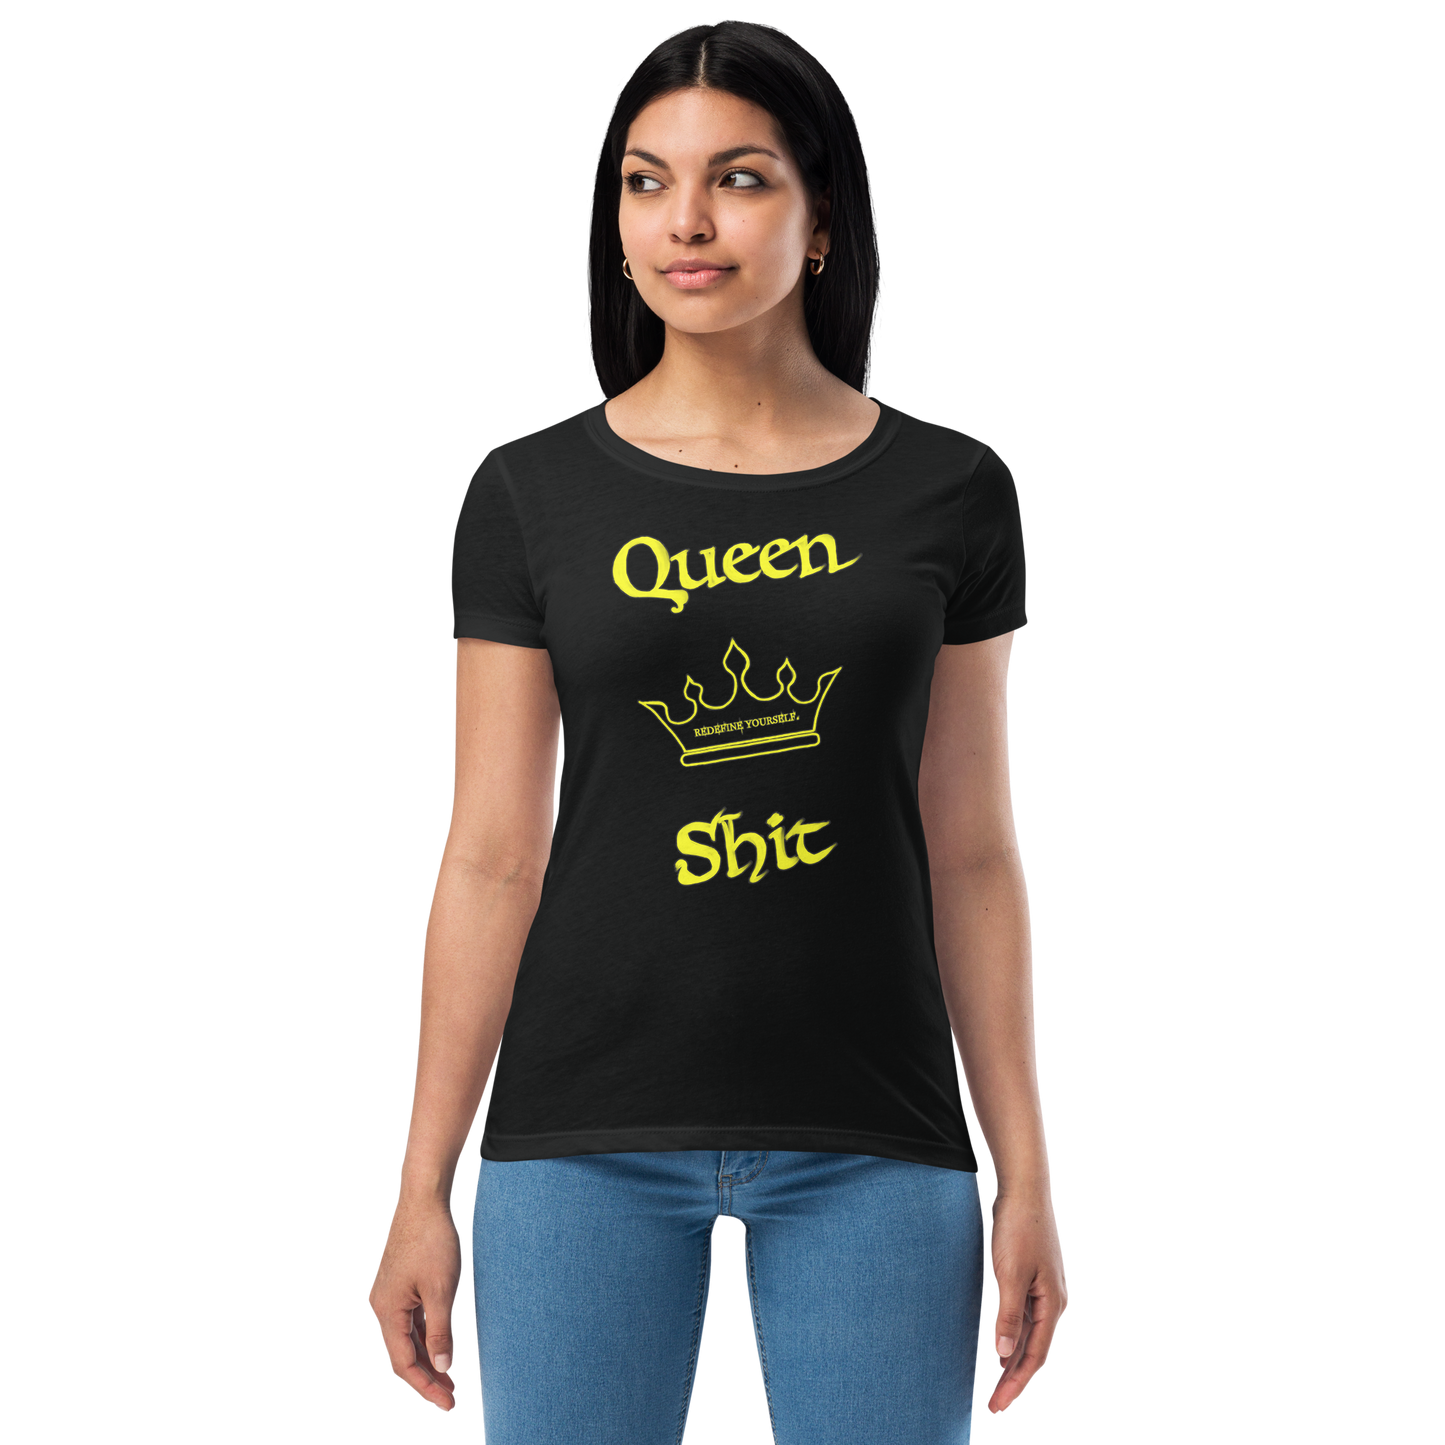 Royal Armor - Queen Shit Women’s fitted t-shirt